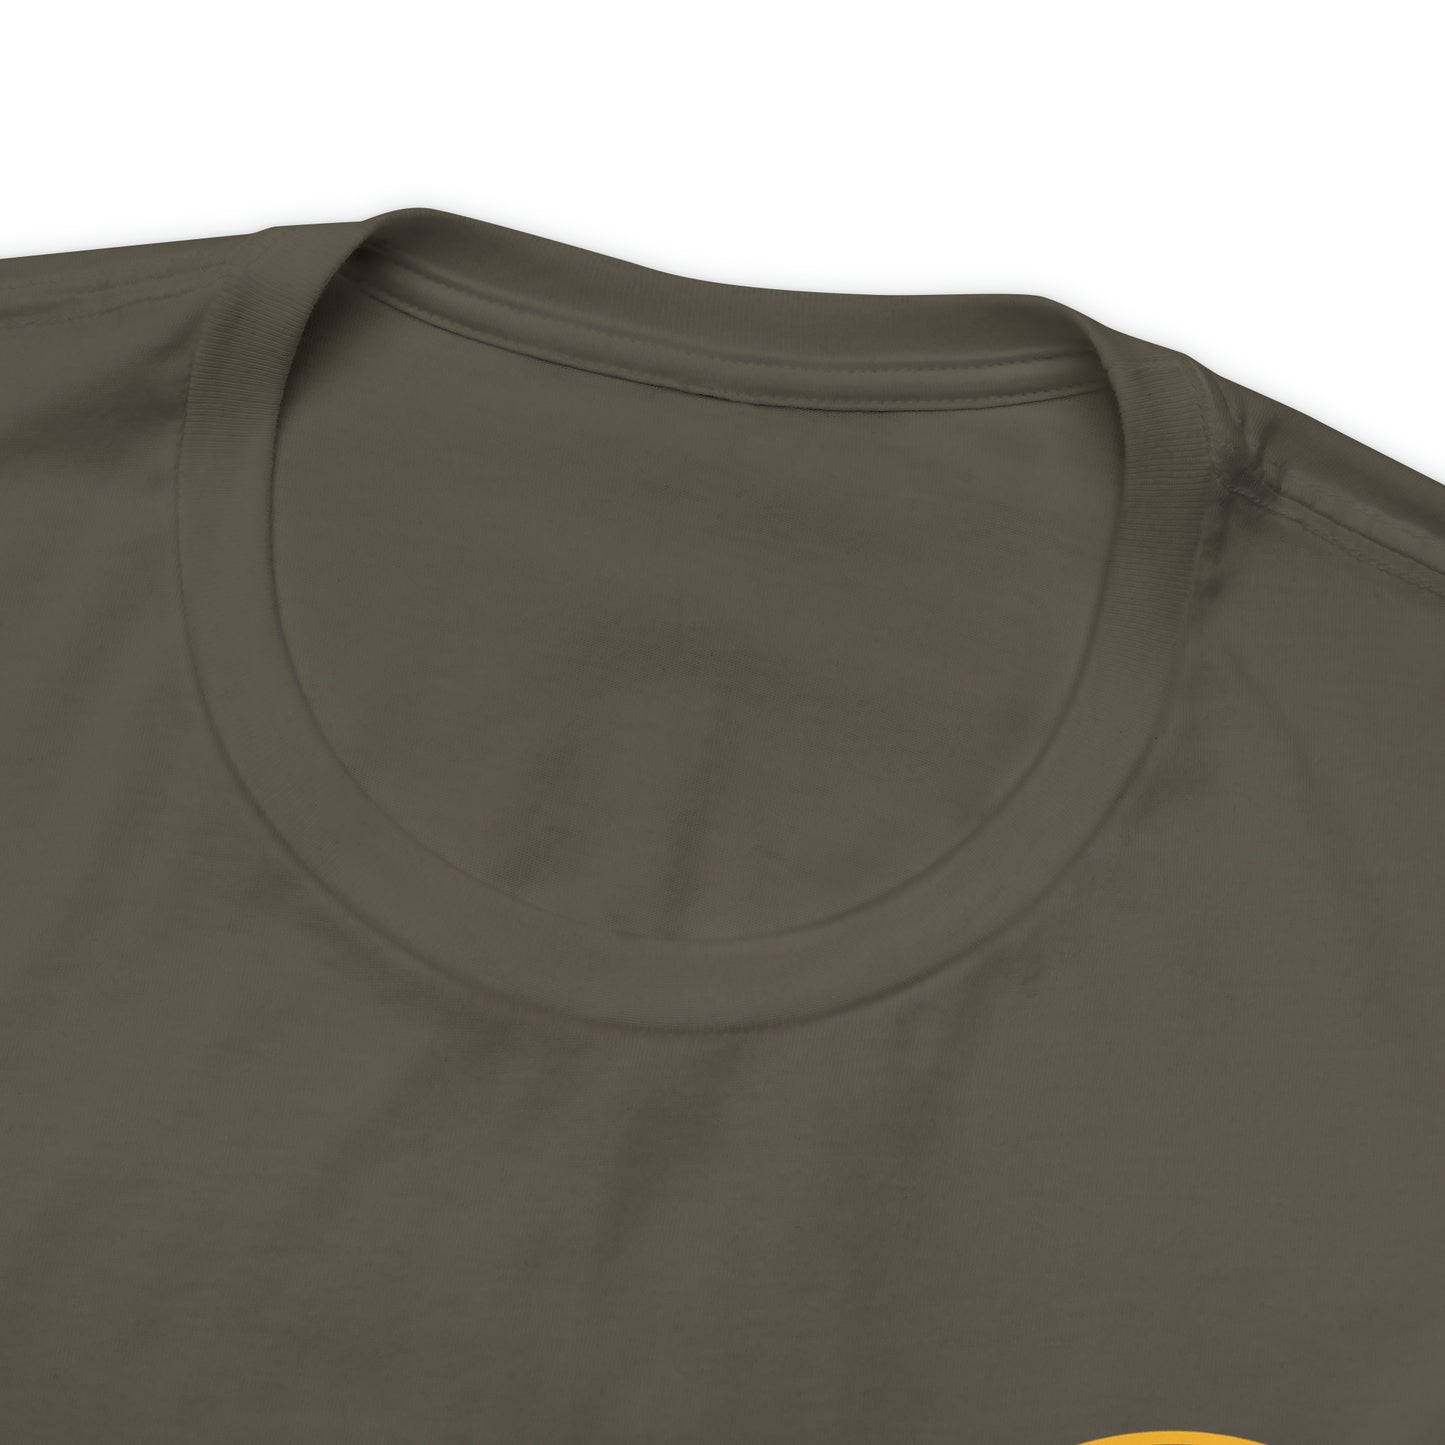 T-Shirt: 13-Star USA Peace Dove Seal (left chest) + Be Part of the Solution (back)